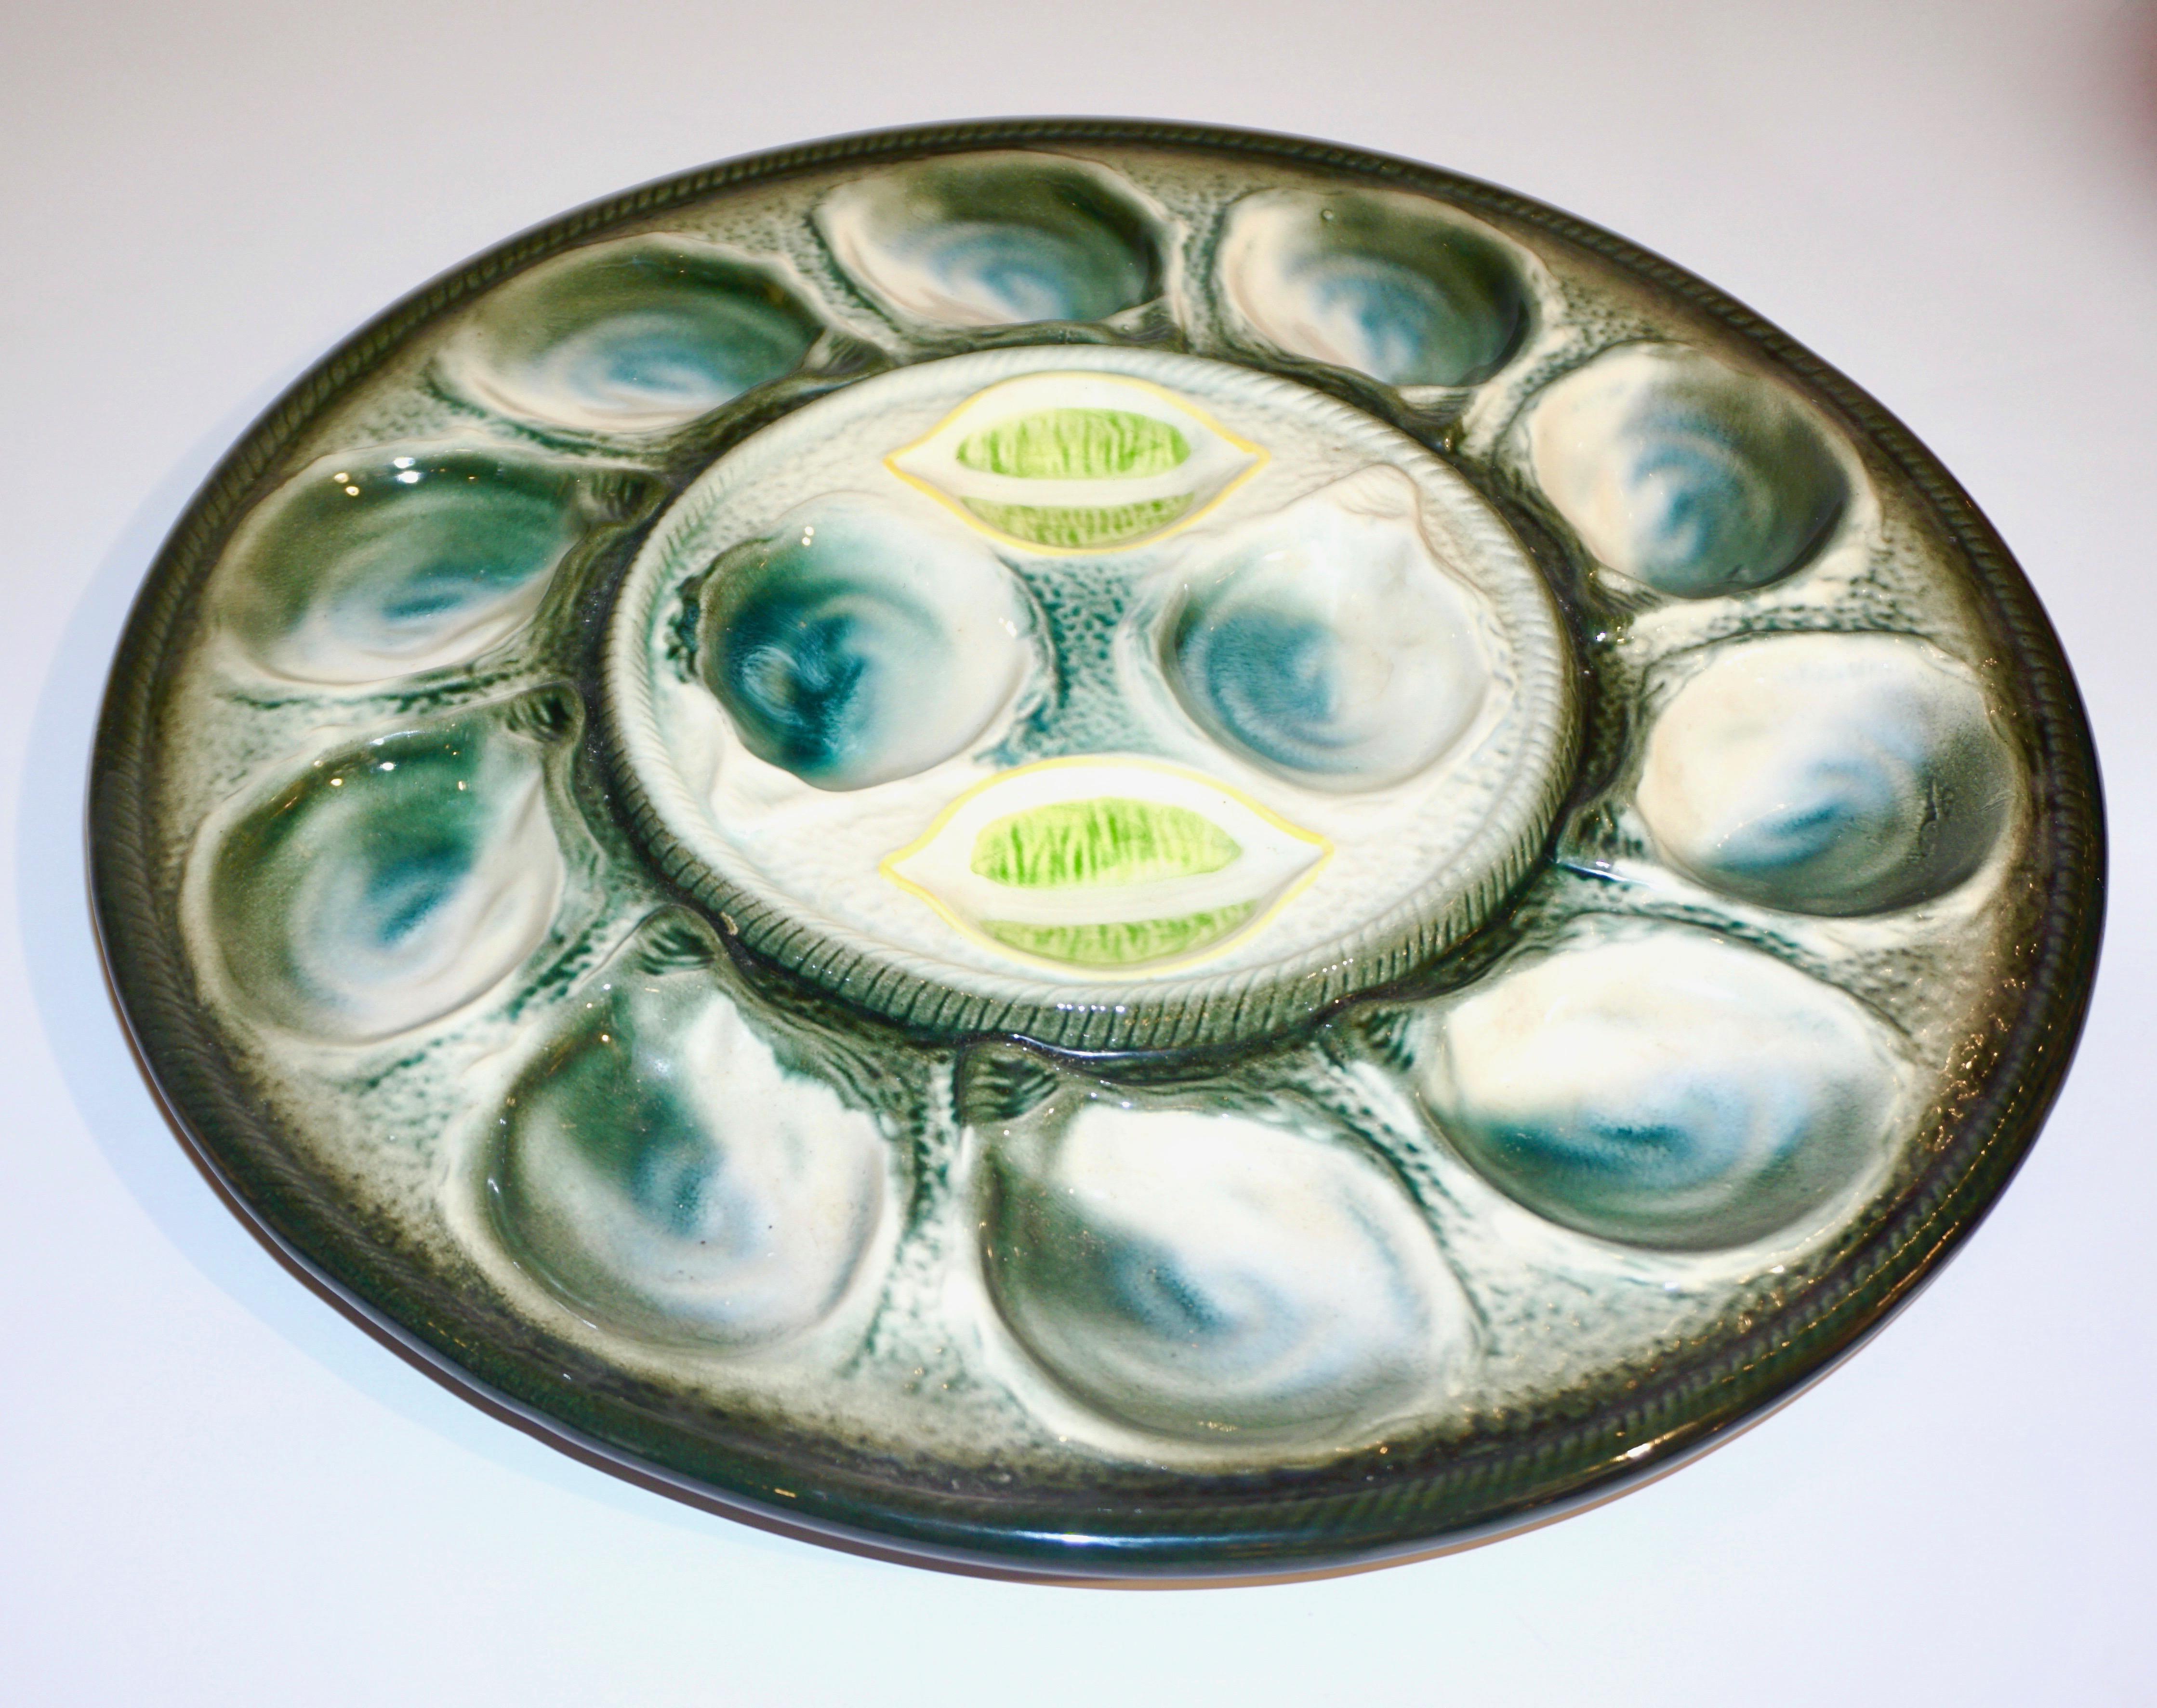 1920s French Art Deco Majolica set of 6 oyster dishes complete with a serving platter for 12 oysters and lemon halves. A set signed by St. Clement Frères, a factory with a very old tradition in 